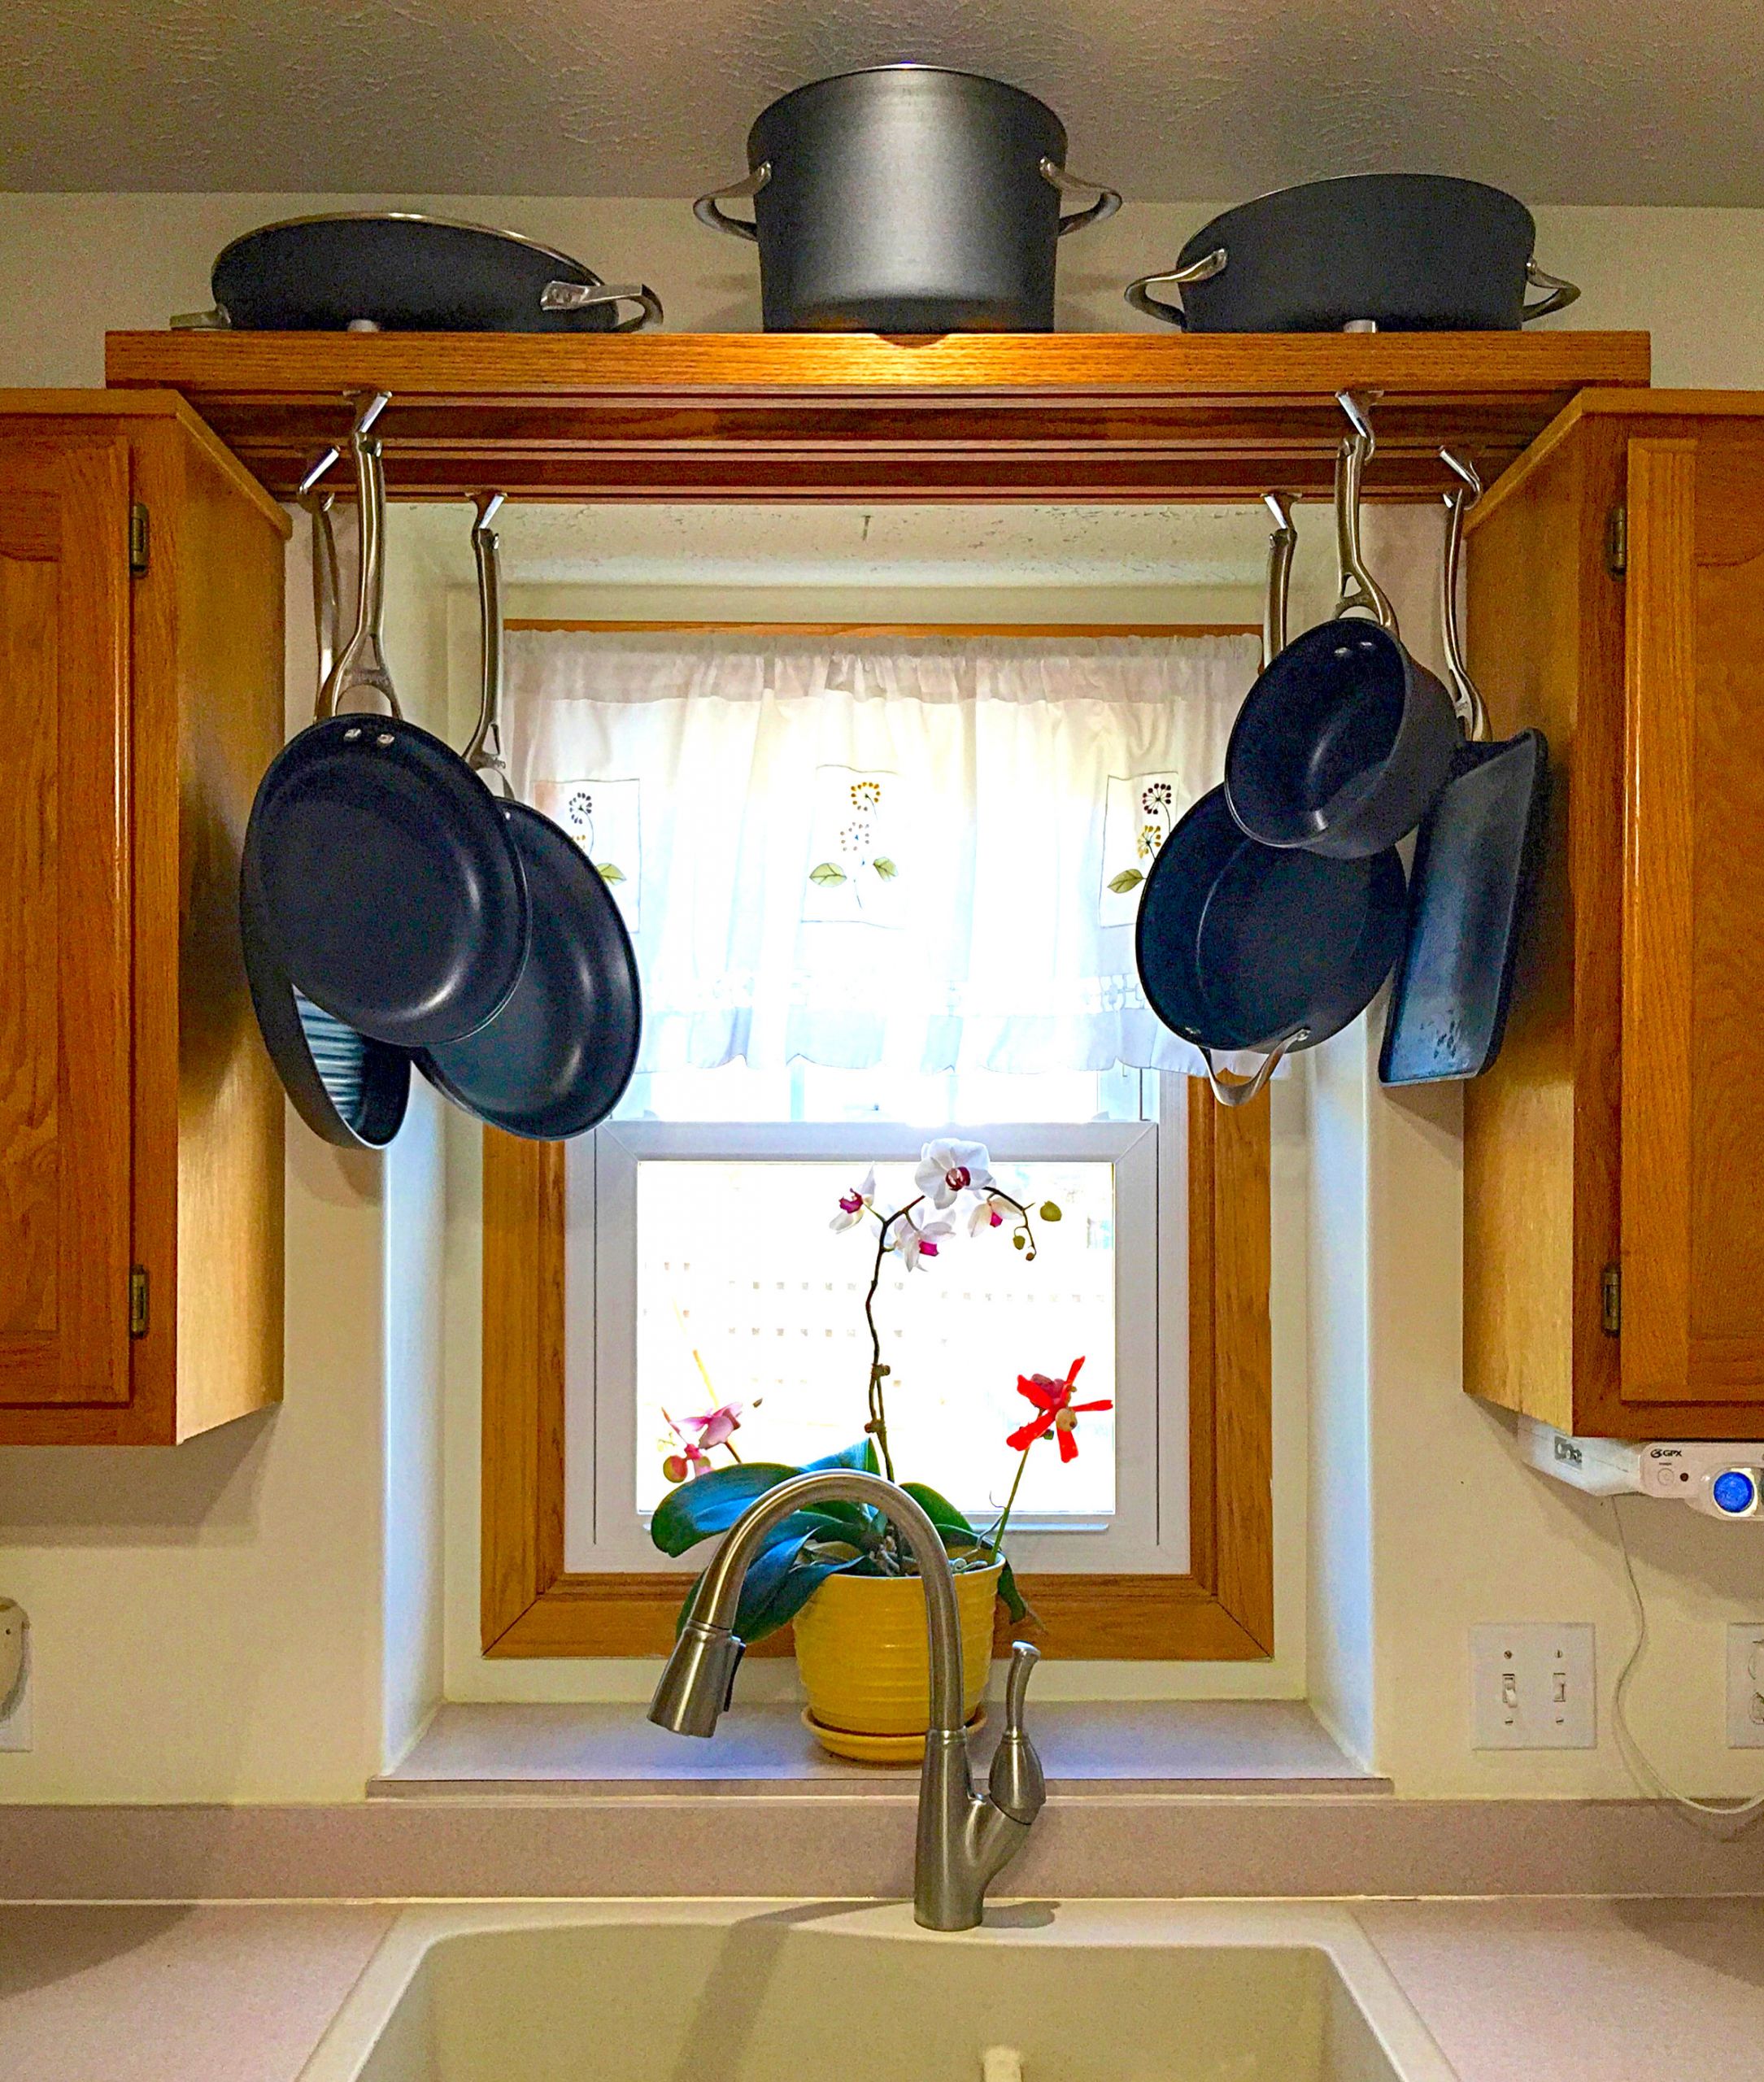 DIY Kitchen Pot Rack
 Make use of space over the kitchen sink with this DIY pot